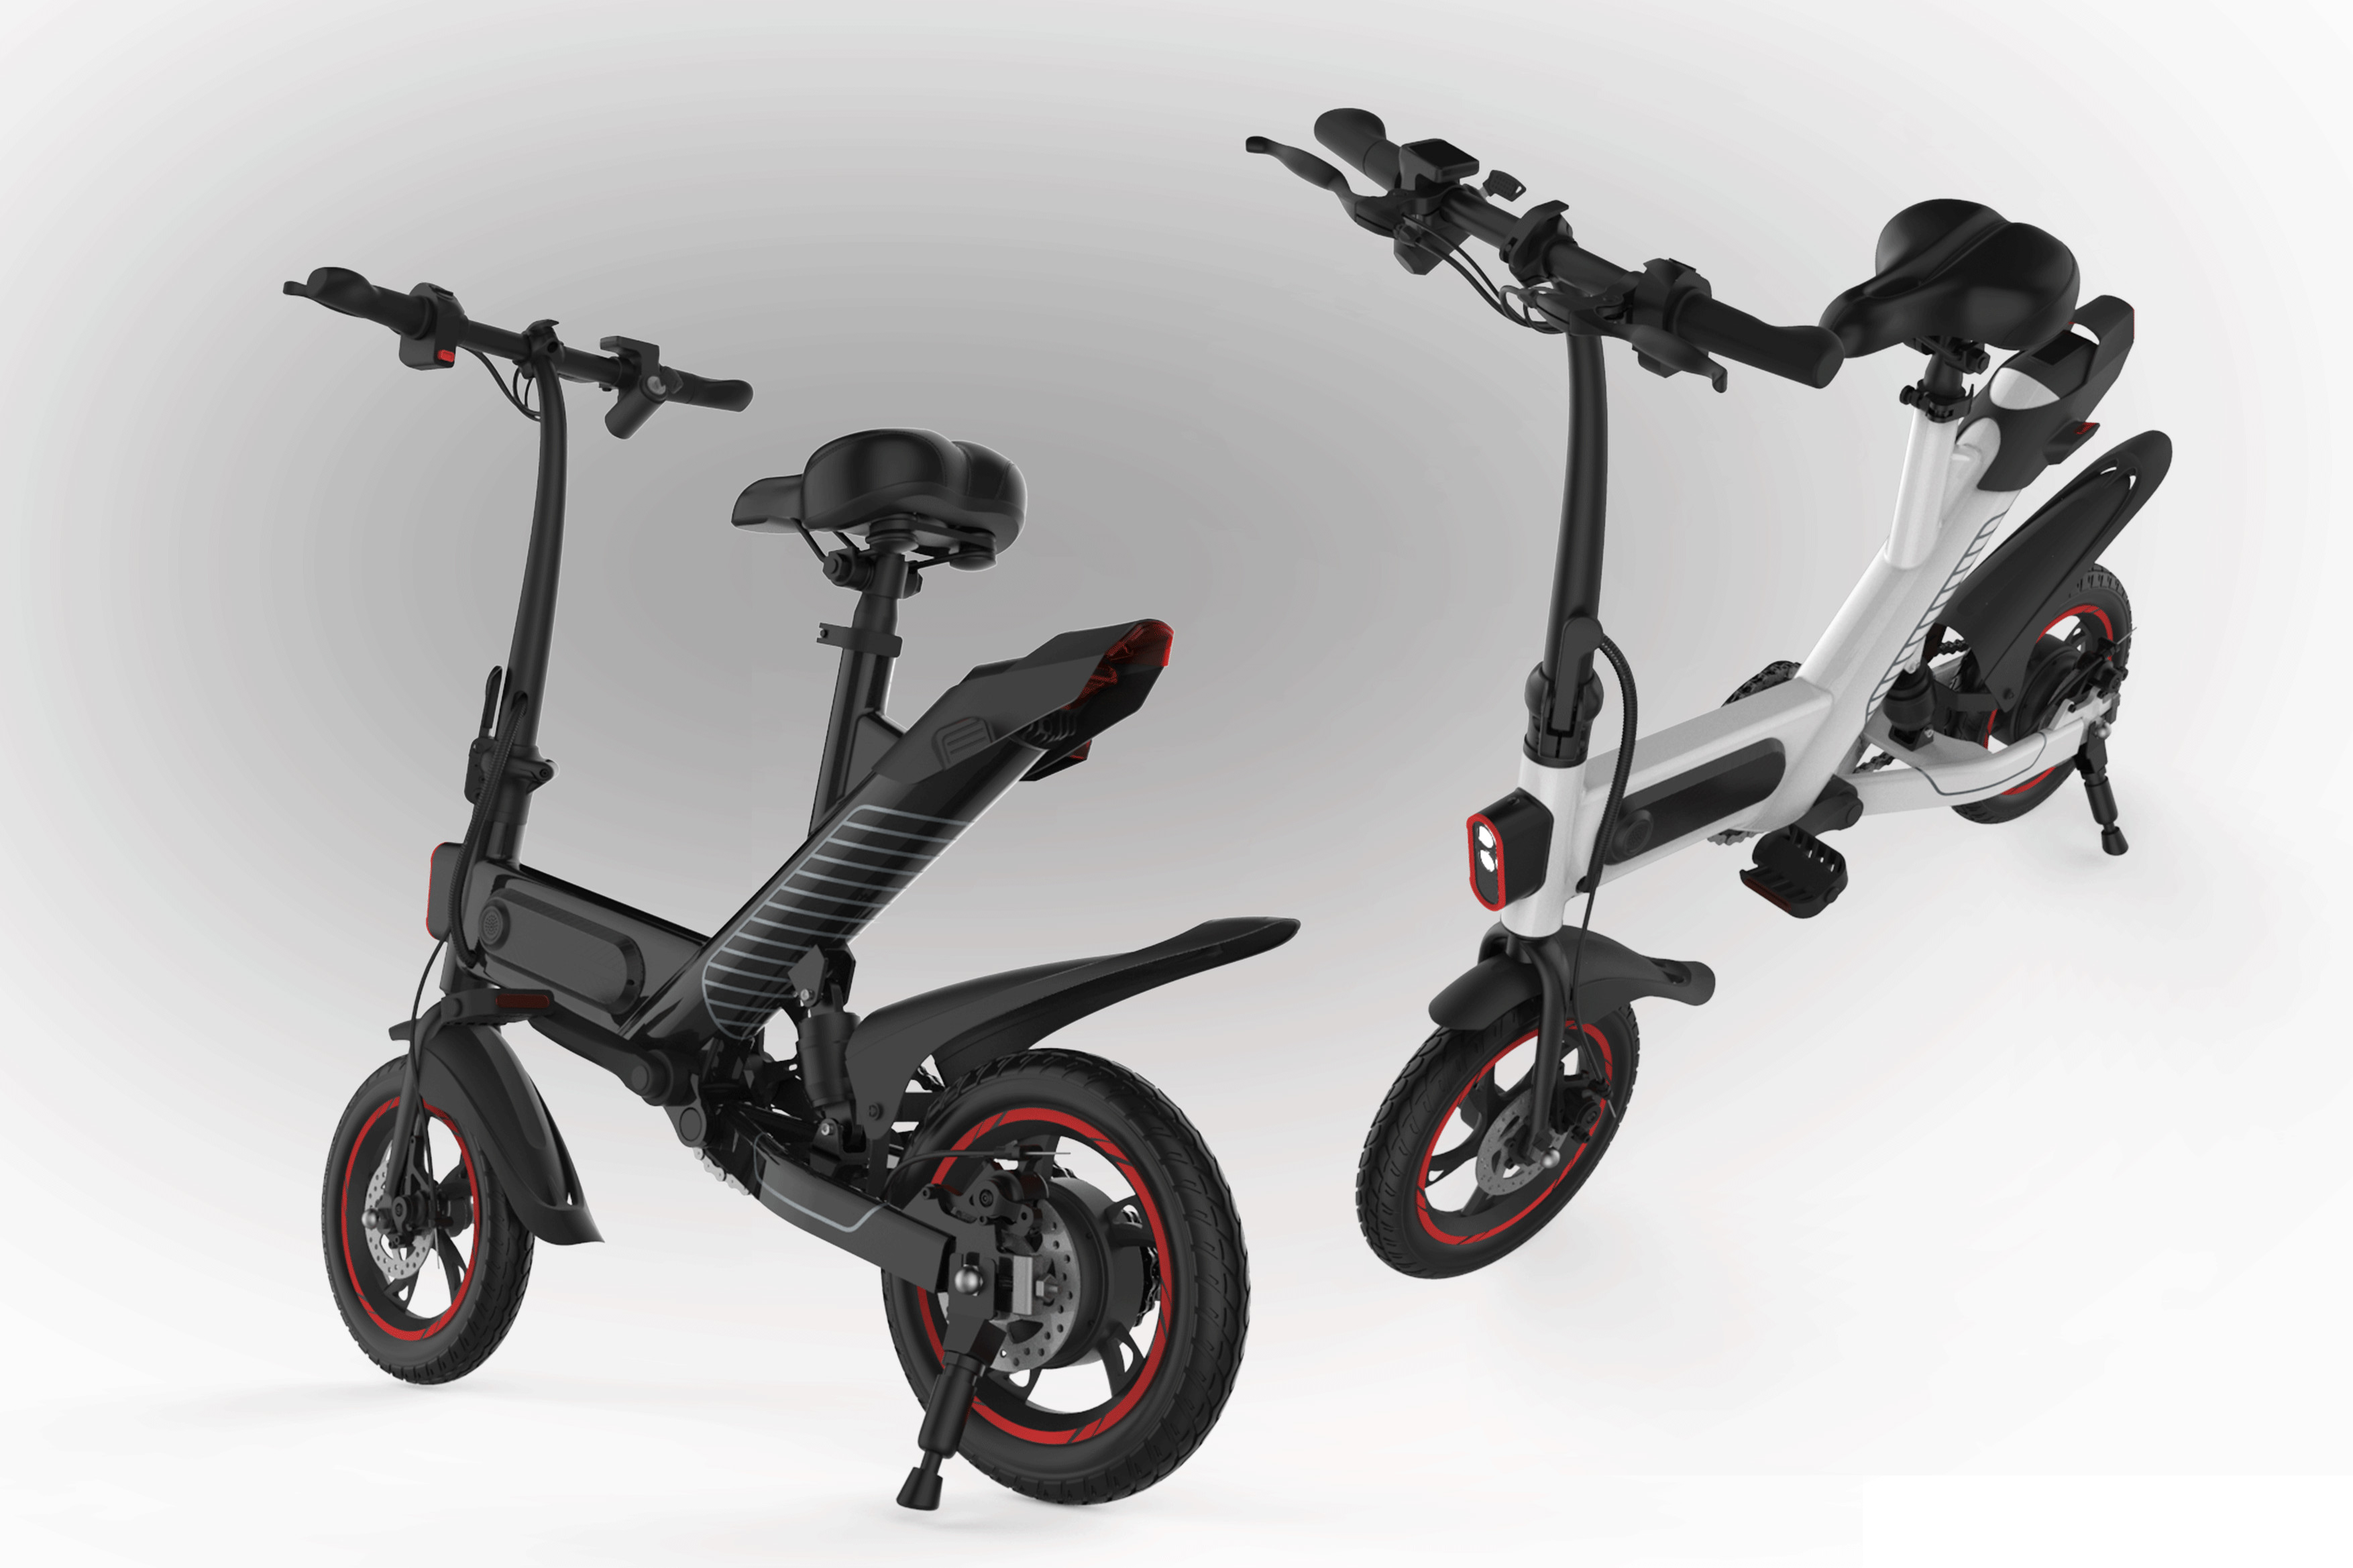 Portable Collapsible Electric Bike , Folding Electric Bicycle With Disc Break System